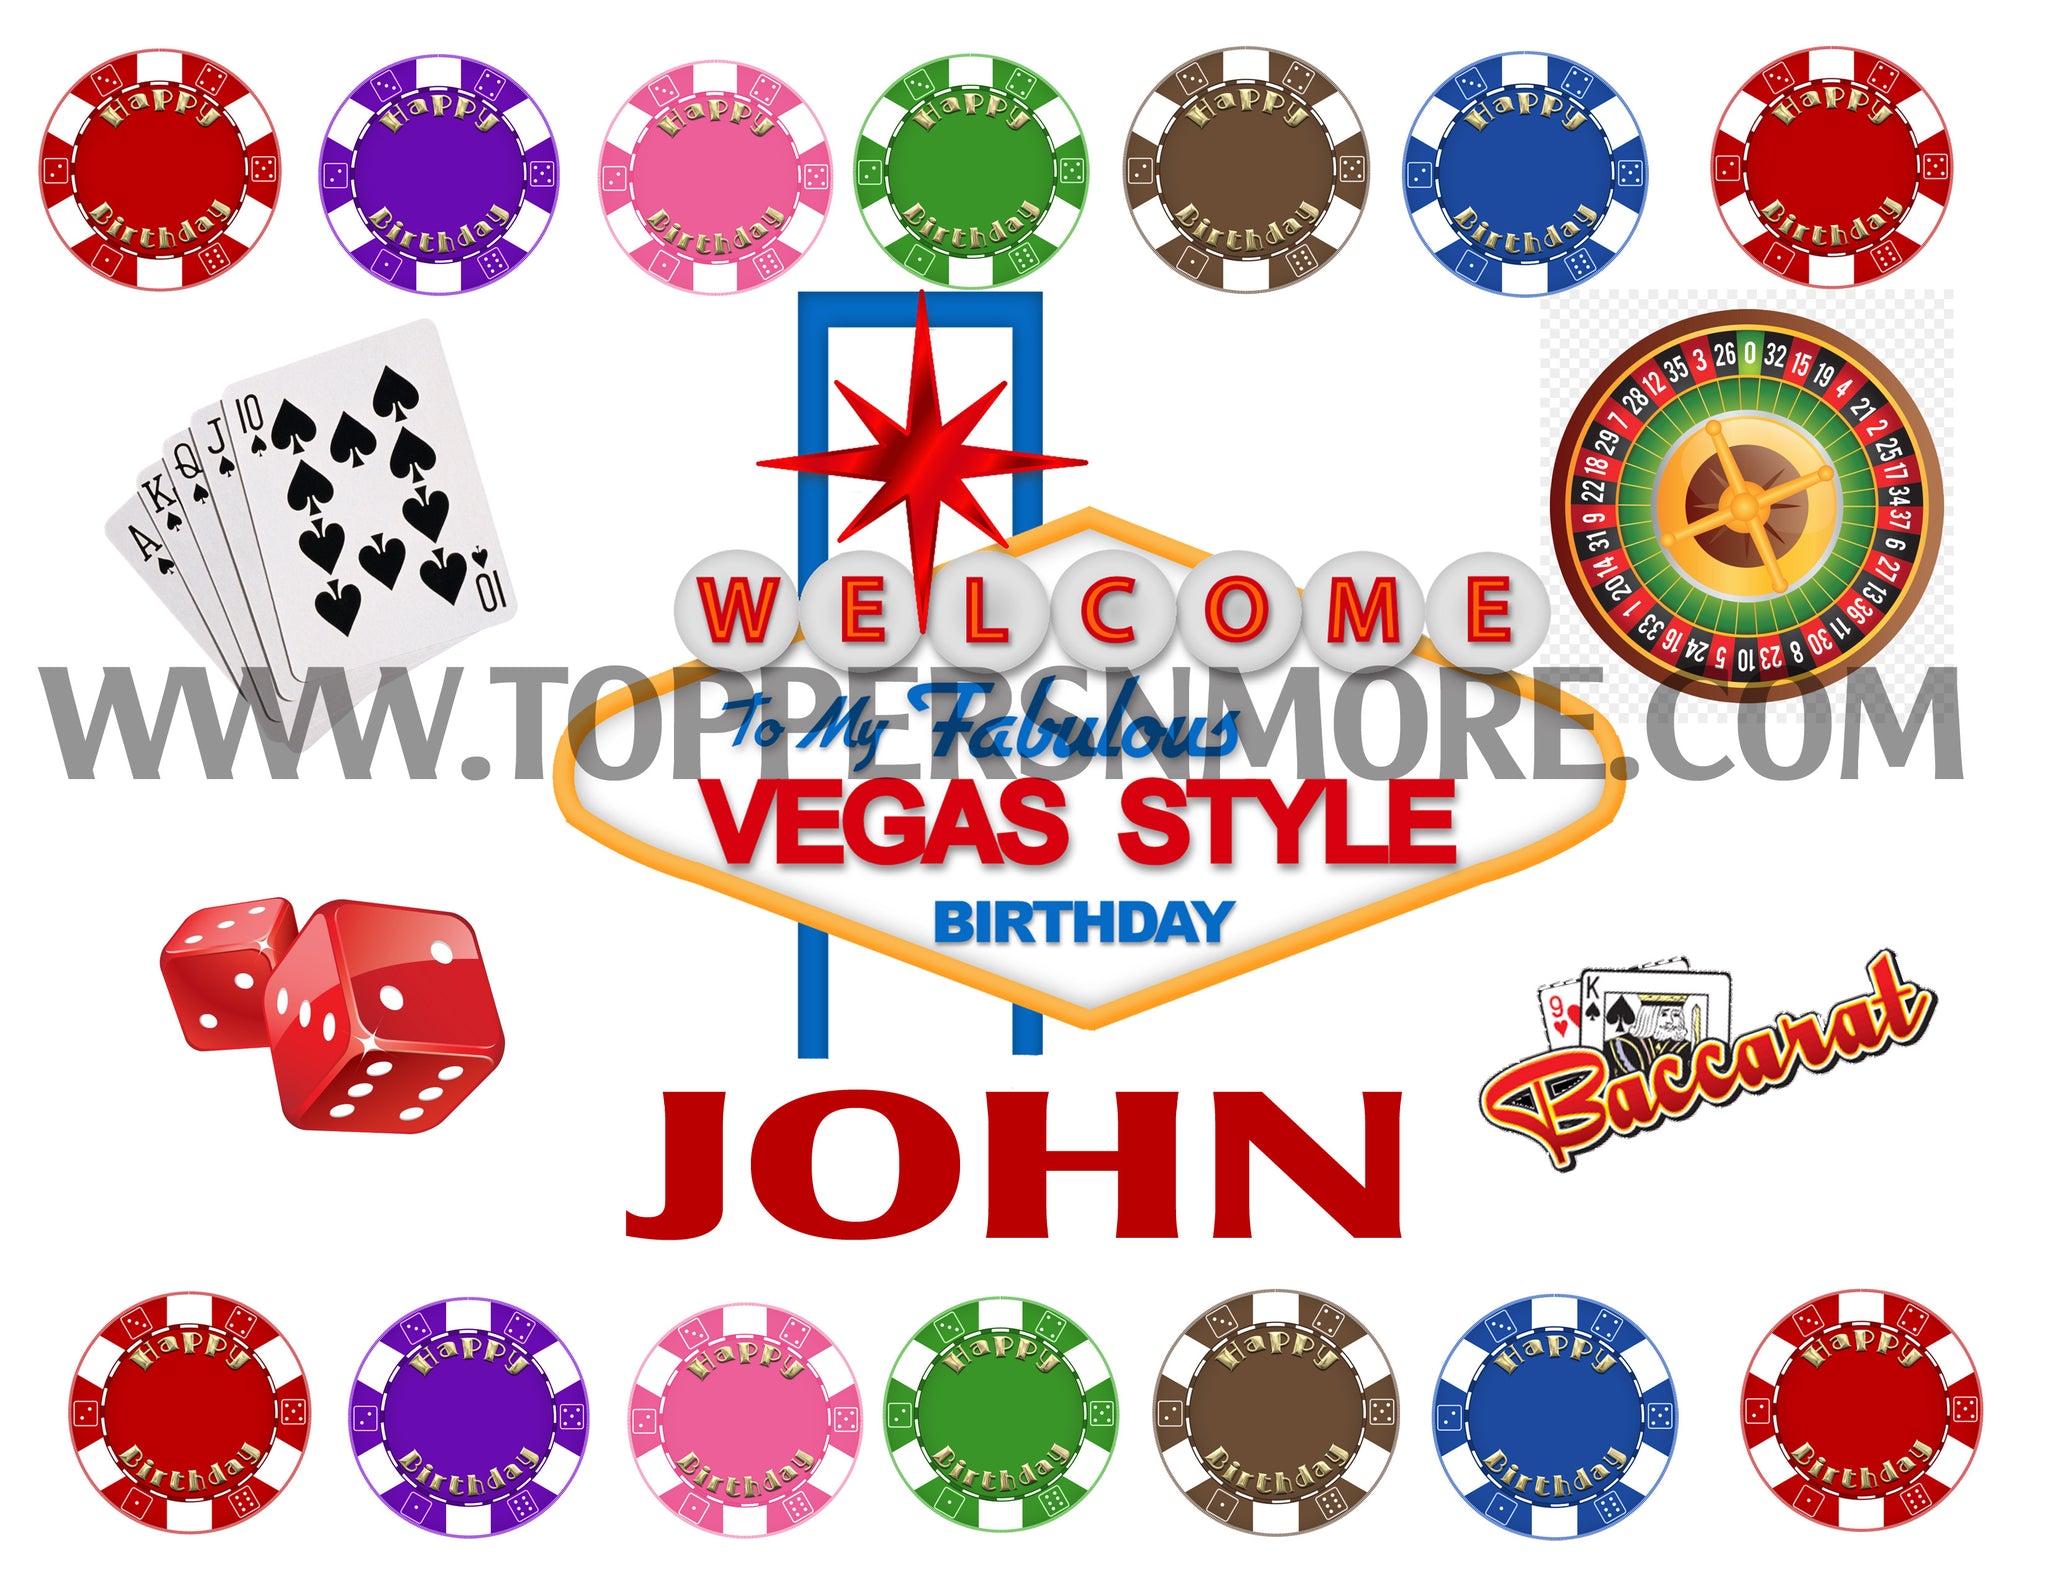 Casino Personalized Edible Print Premium Cake Toppers Frosting Sheets 5 Sizes